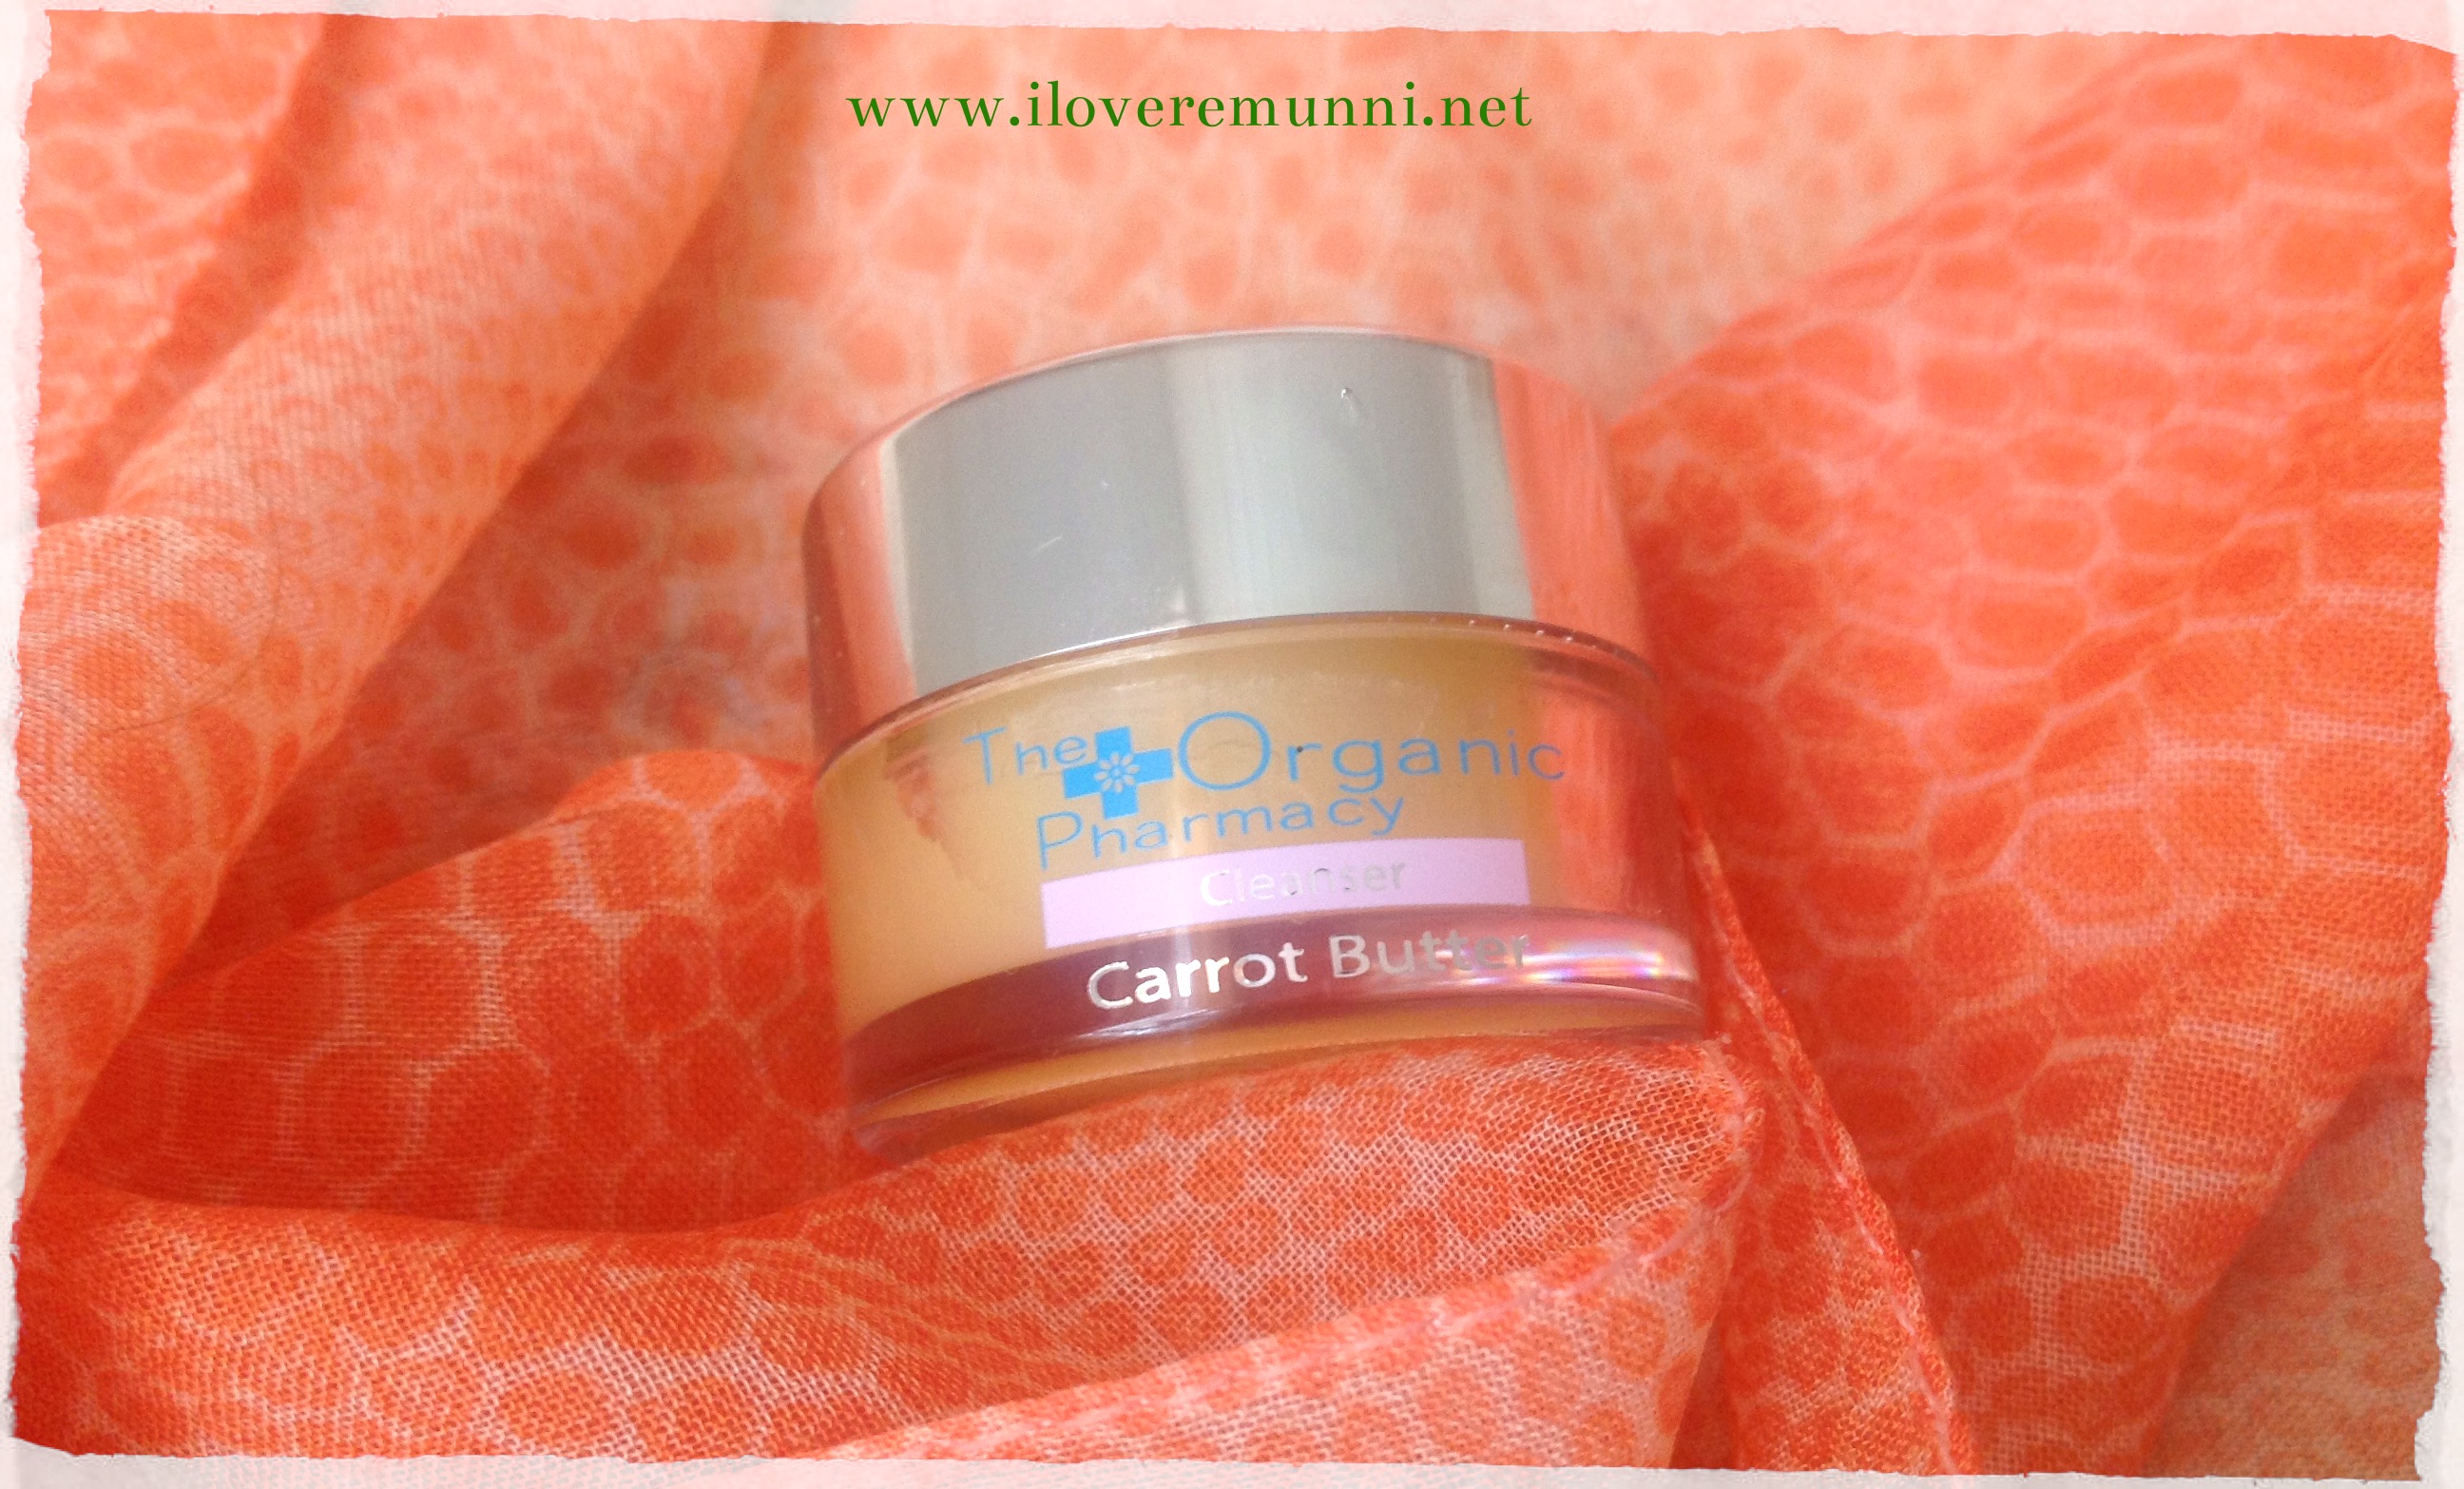 Organic-pharmacy-carrot-butter-opinione-recensione-inci